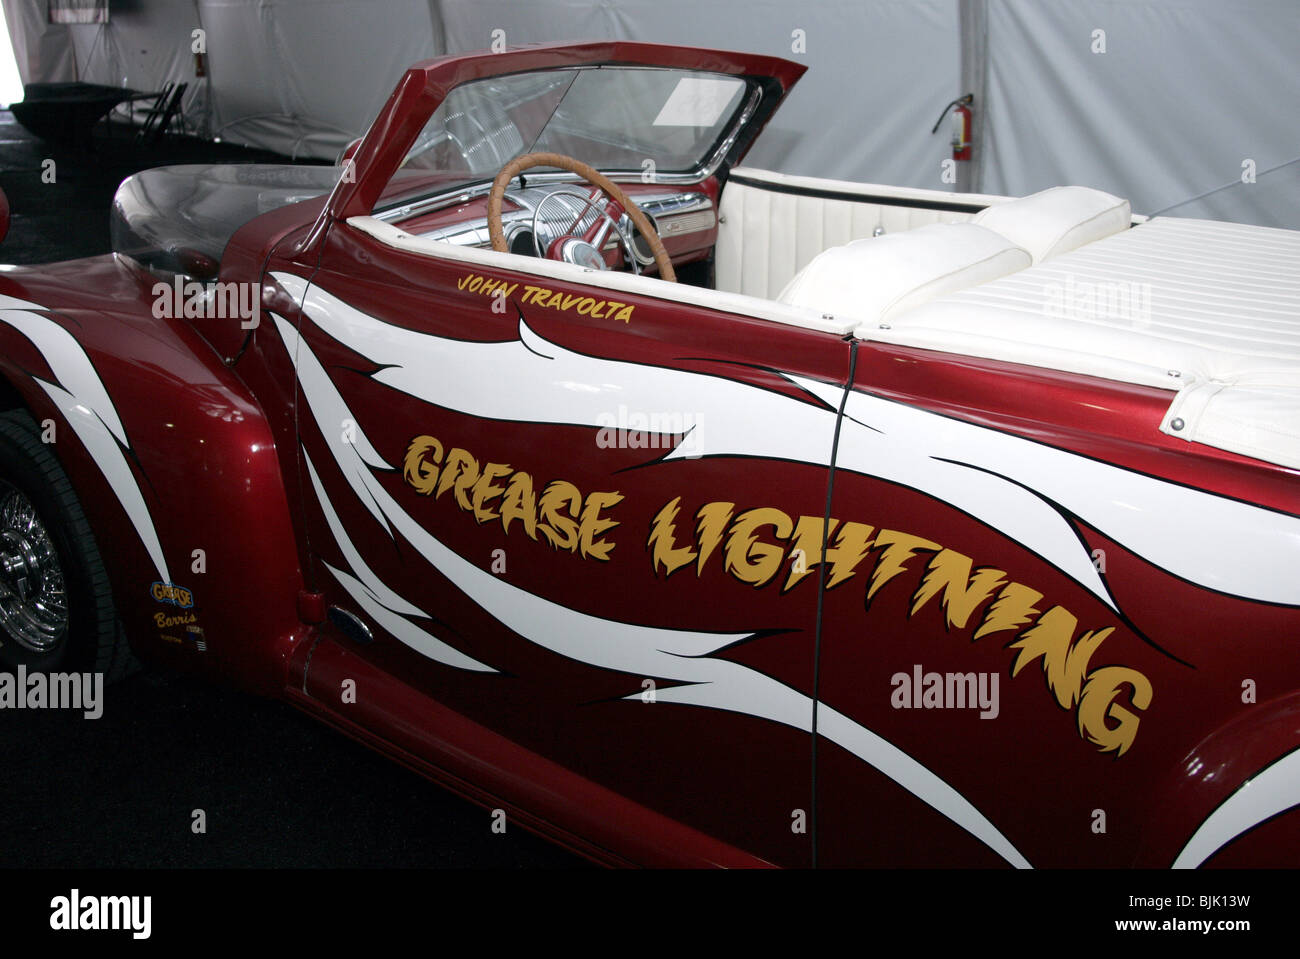 GREASE 'GREASE LIGHTNING' 1946 FORD GEORGE BARRIS COLLECTION OF KU PETERSEN MUSEUM LOS ANGELES USA 13 May 2005 Stock Photo